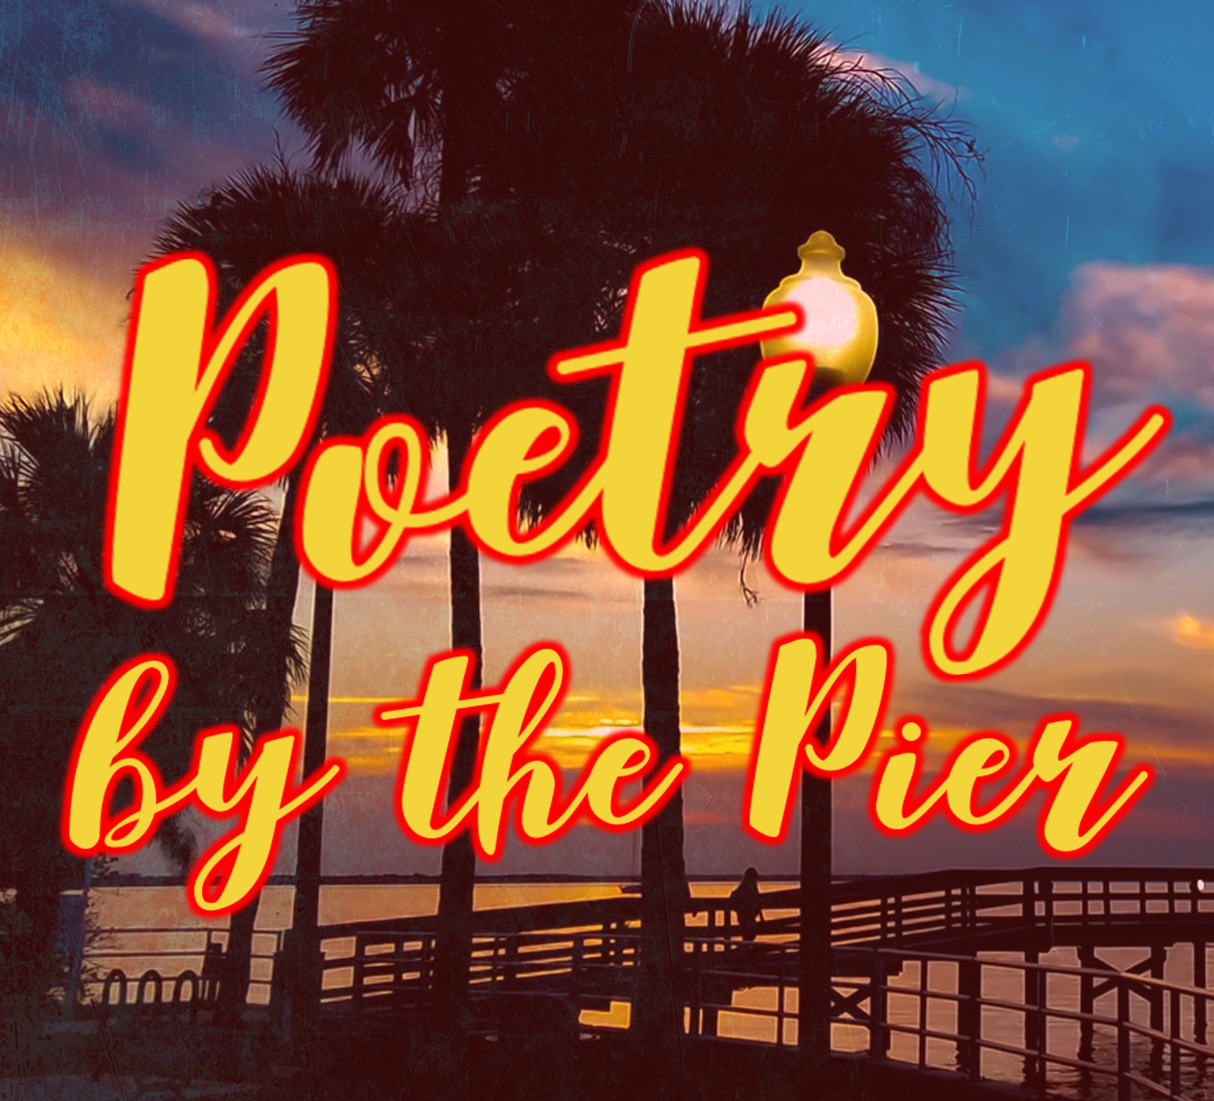 Poetry by the Pier